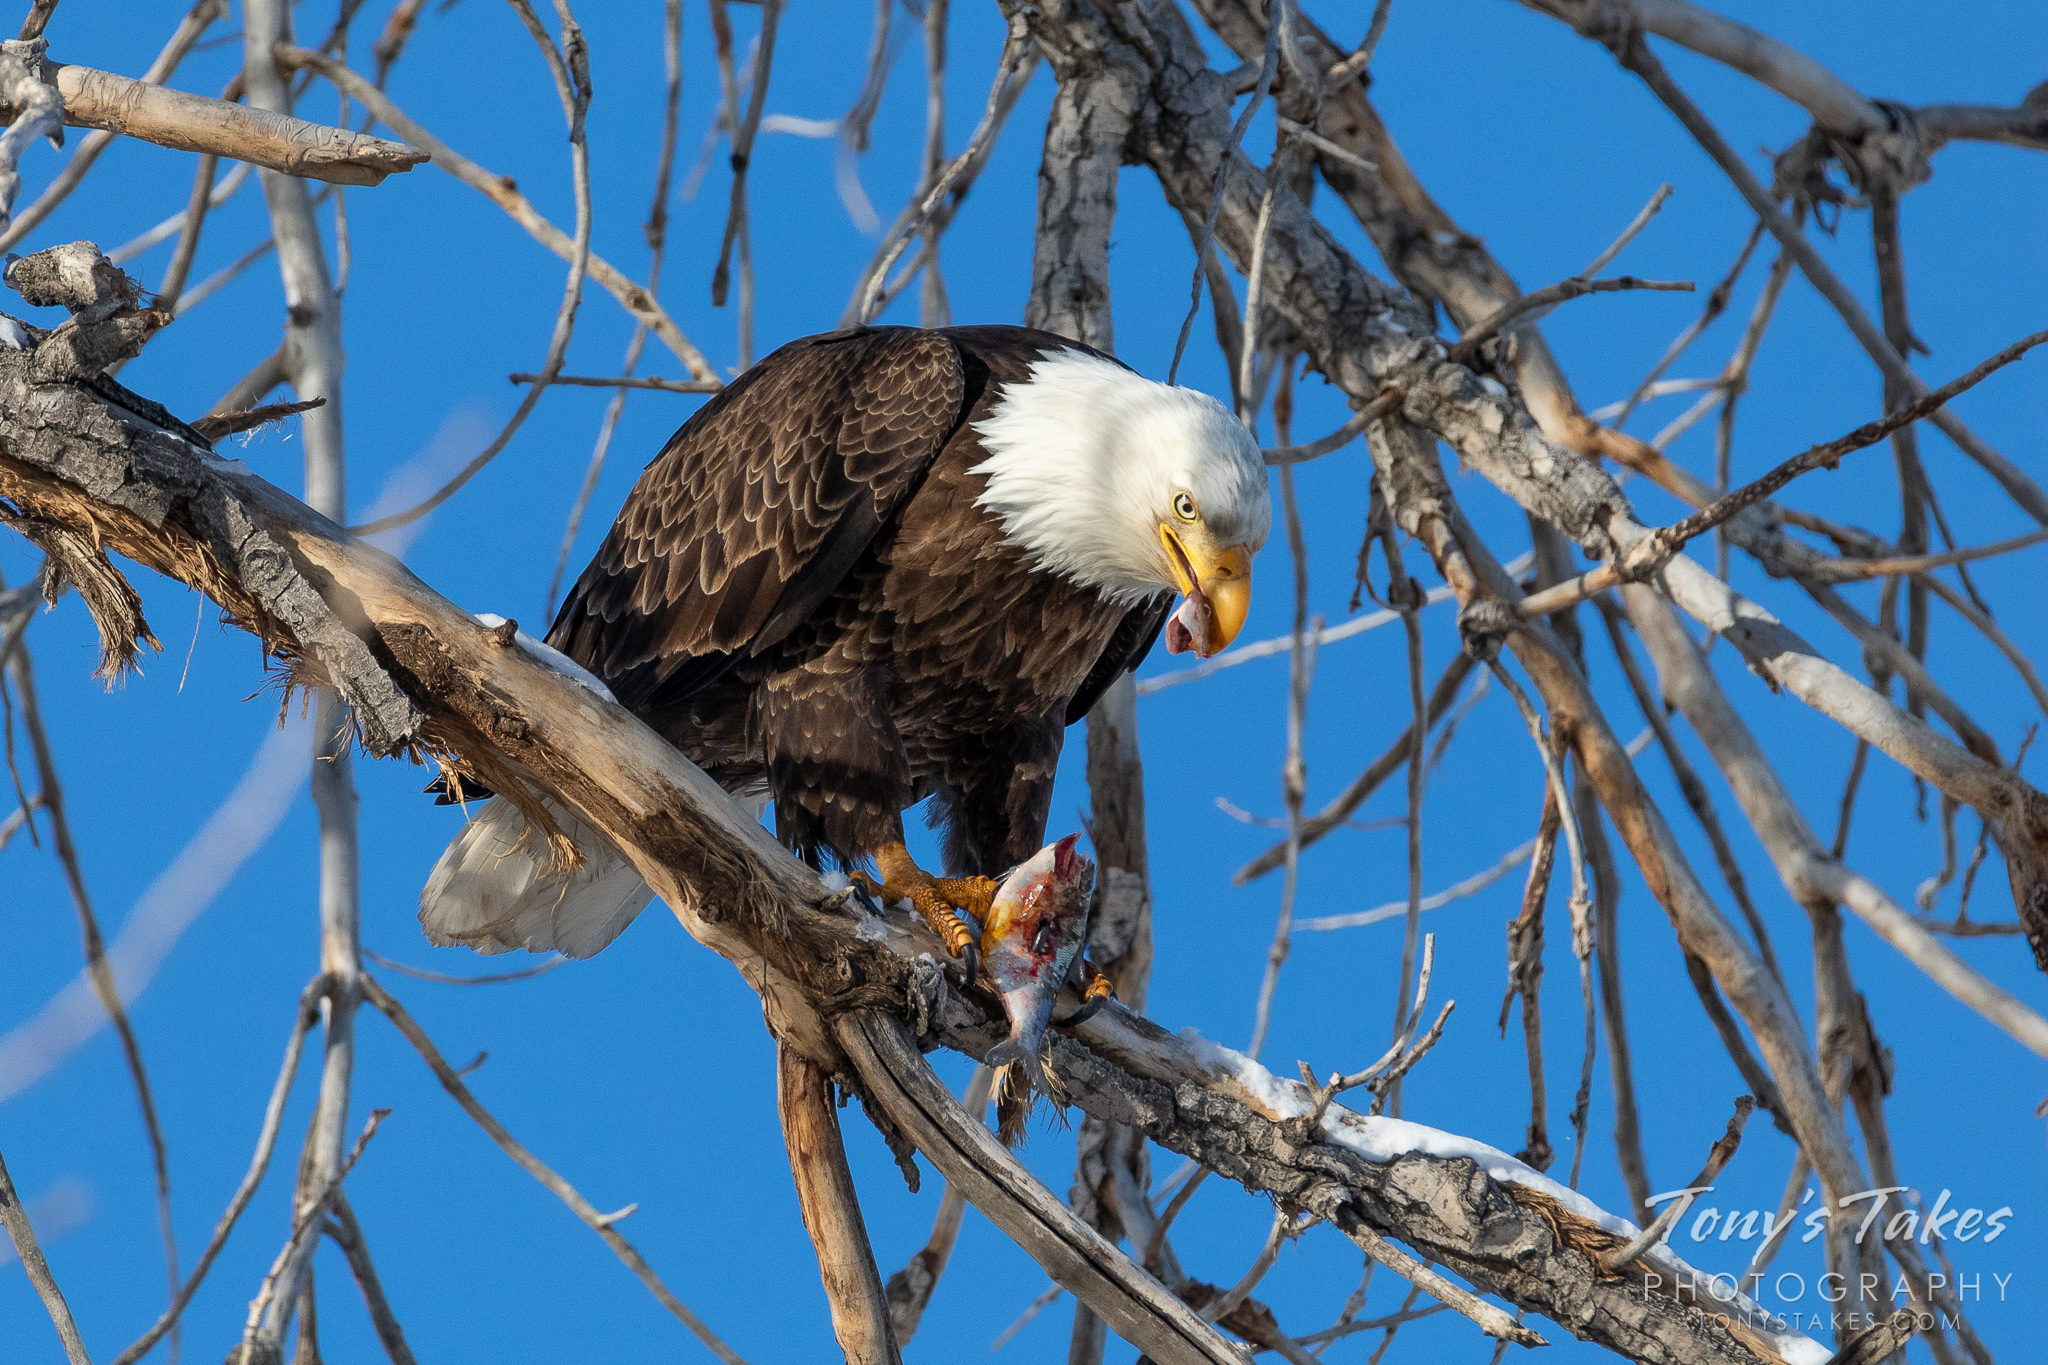 A bald eagle dines on a fish it caught from a pond in Adams County, Colorado. (© Tony’s Takes)